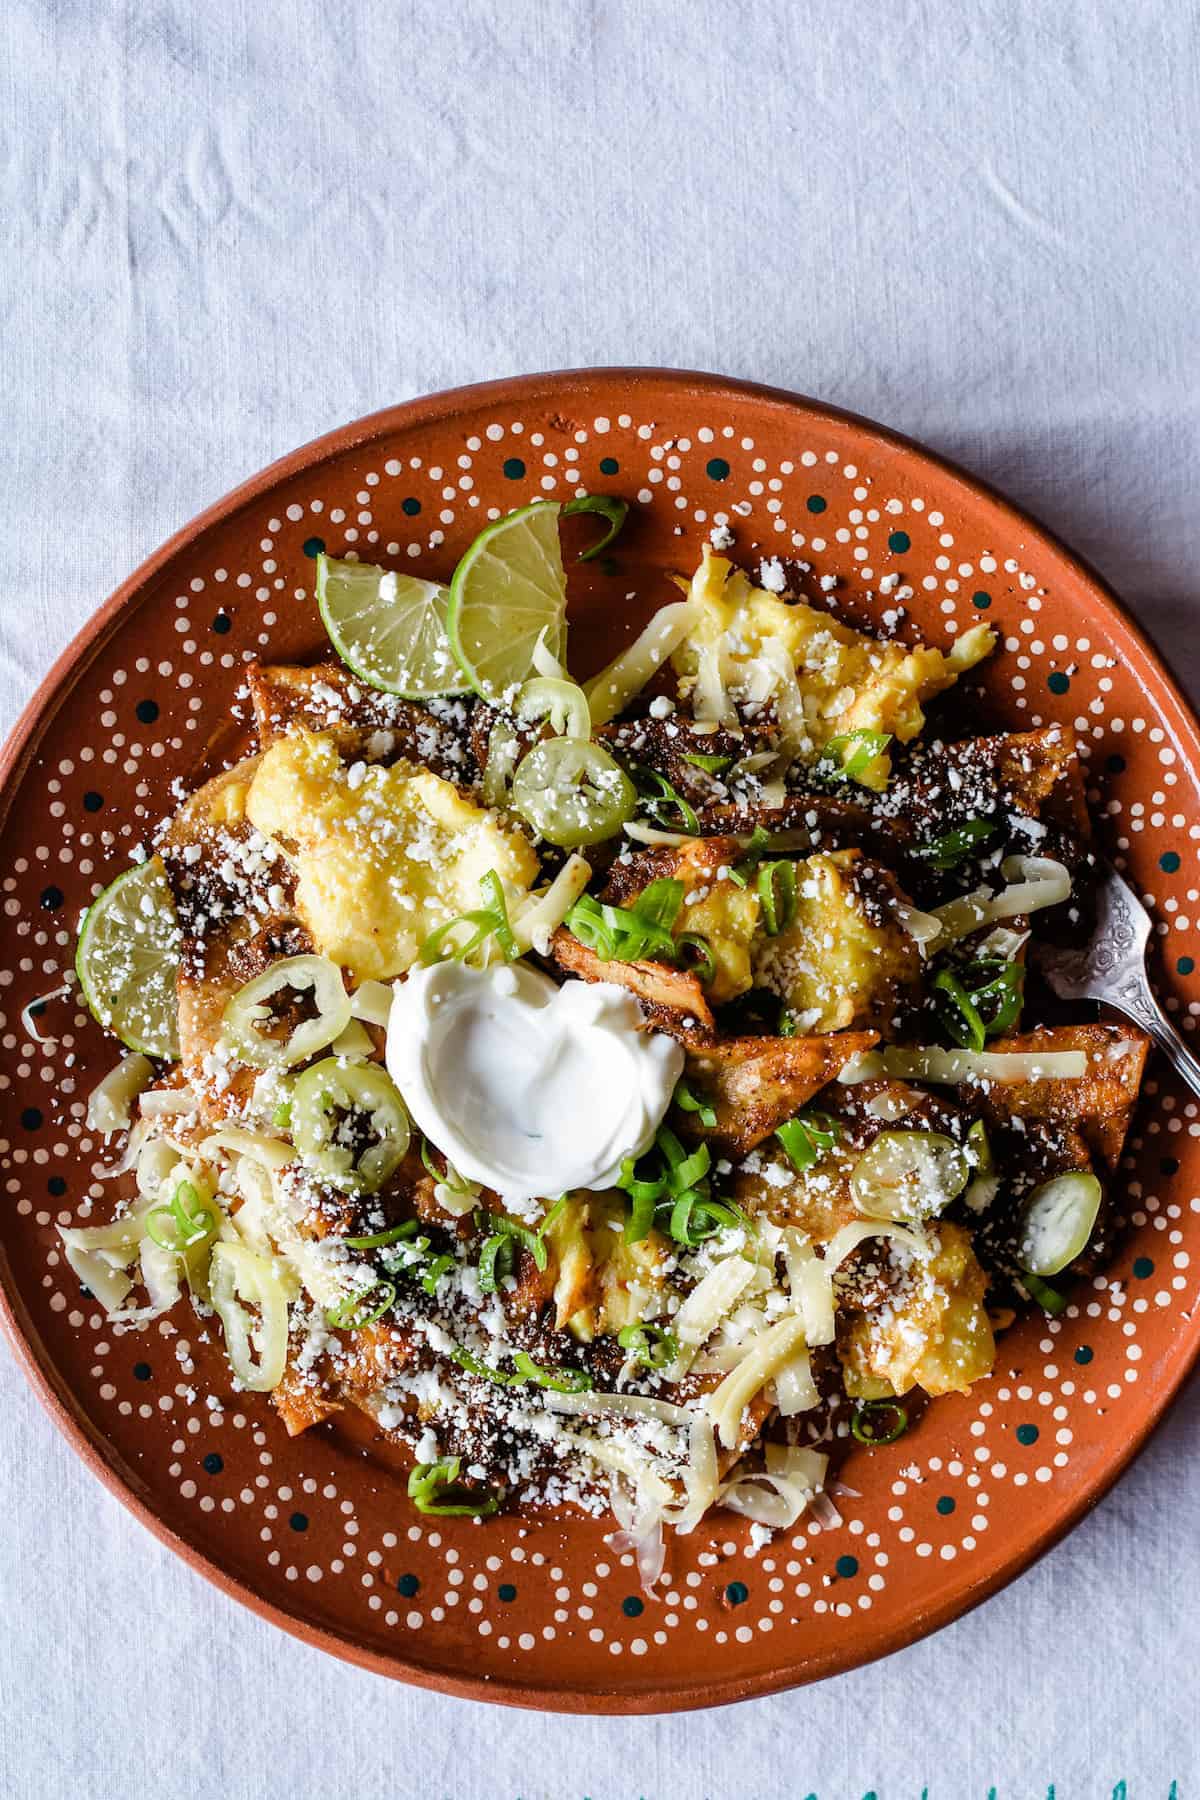 Need some major breakfast inspiration? For the perfect Mexican breakfast, whip up a batch of these Mexican Chilaquiles. A simple recipe that can be 100% homemade or swap store-bought ingredients. Try out the Chilaquiles recipe with scrambled eggs or swap out for a fried egg or even grilled chicken. Gluten-Free and Vegan Adaptable! #chilaquiles #mexicanchilaquiles #chilaquilesrojos #mexicanbreakfast